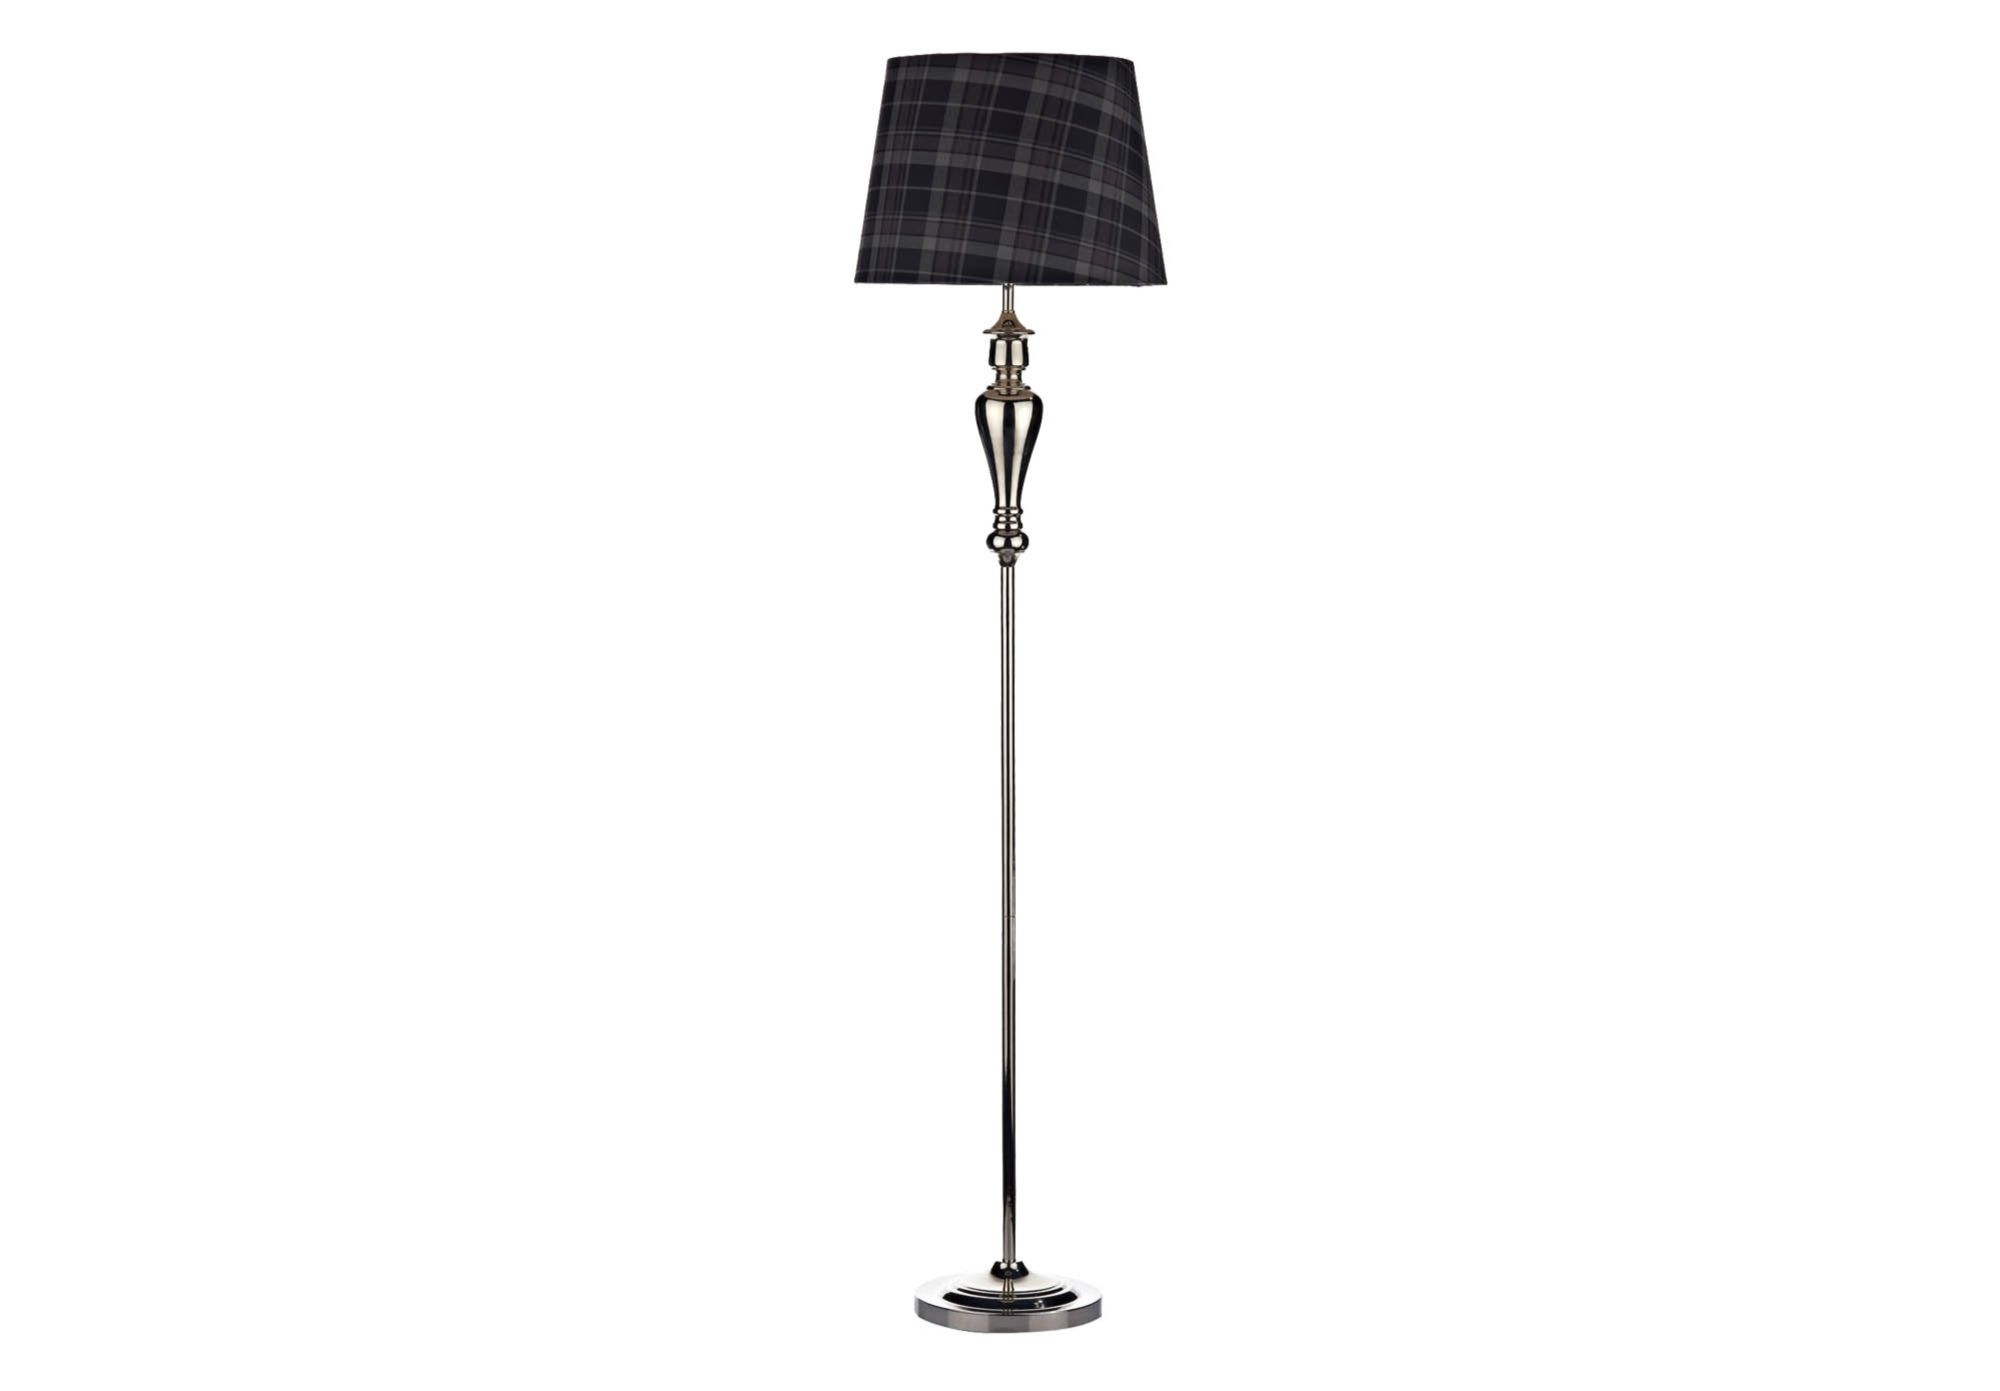 We Love This Bonnie Check Floor Lamp Lighting Floor throughout sizing 2000 X 1391